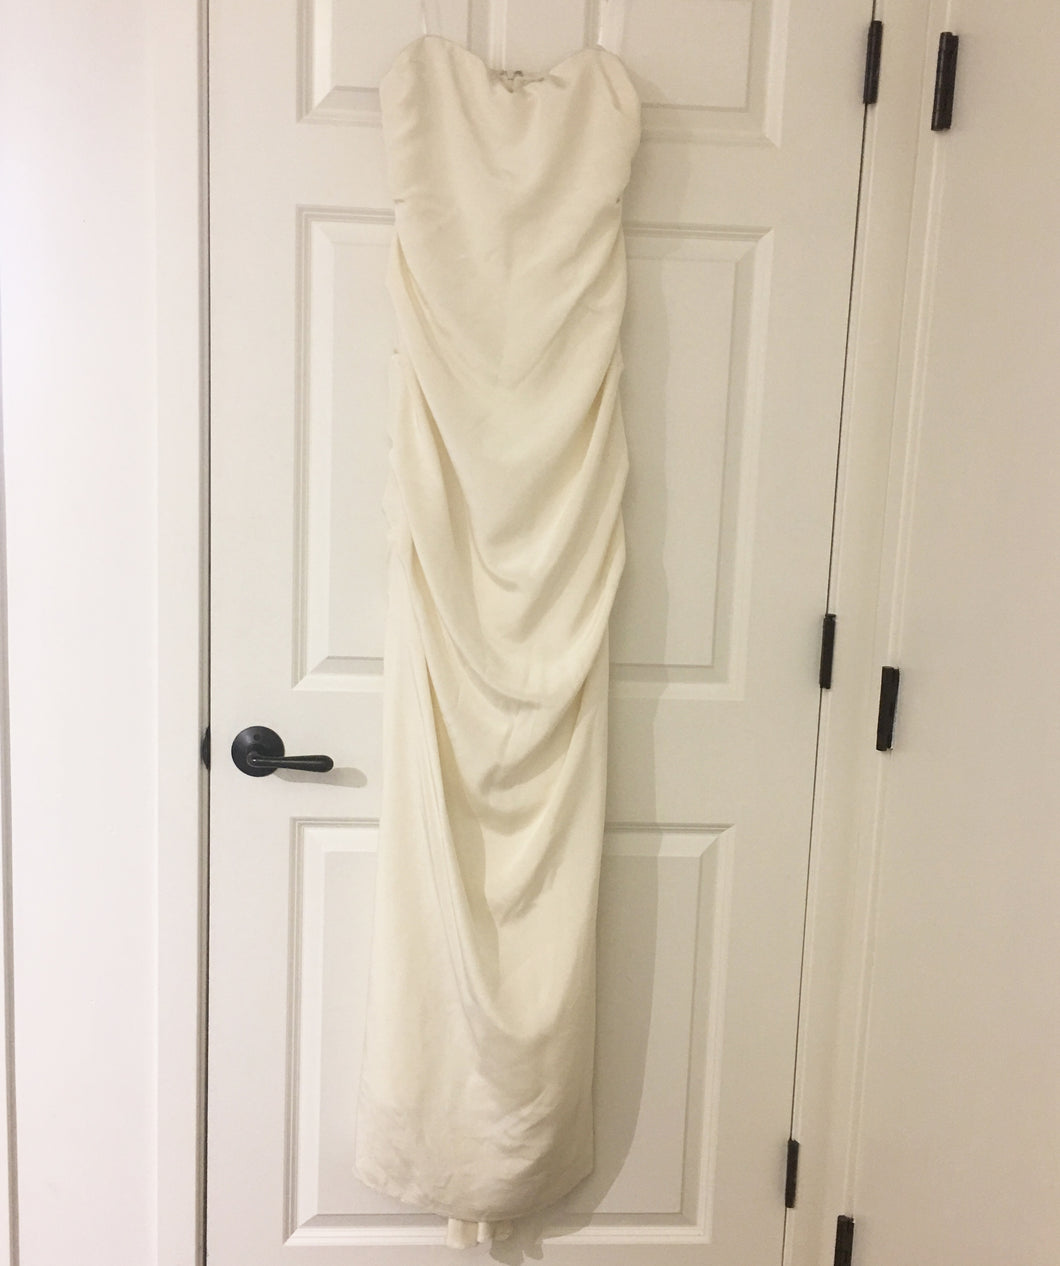 Nicole Miller 'Strapless Ruched' size 12 sample wedding dress front view on hanger